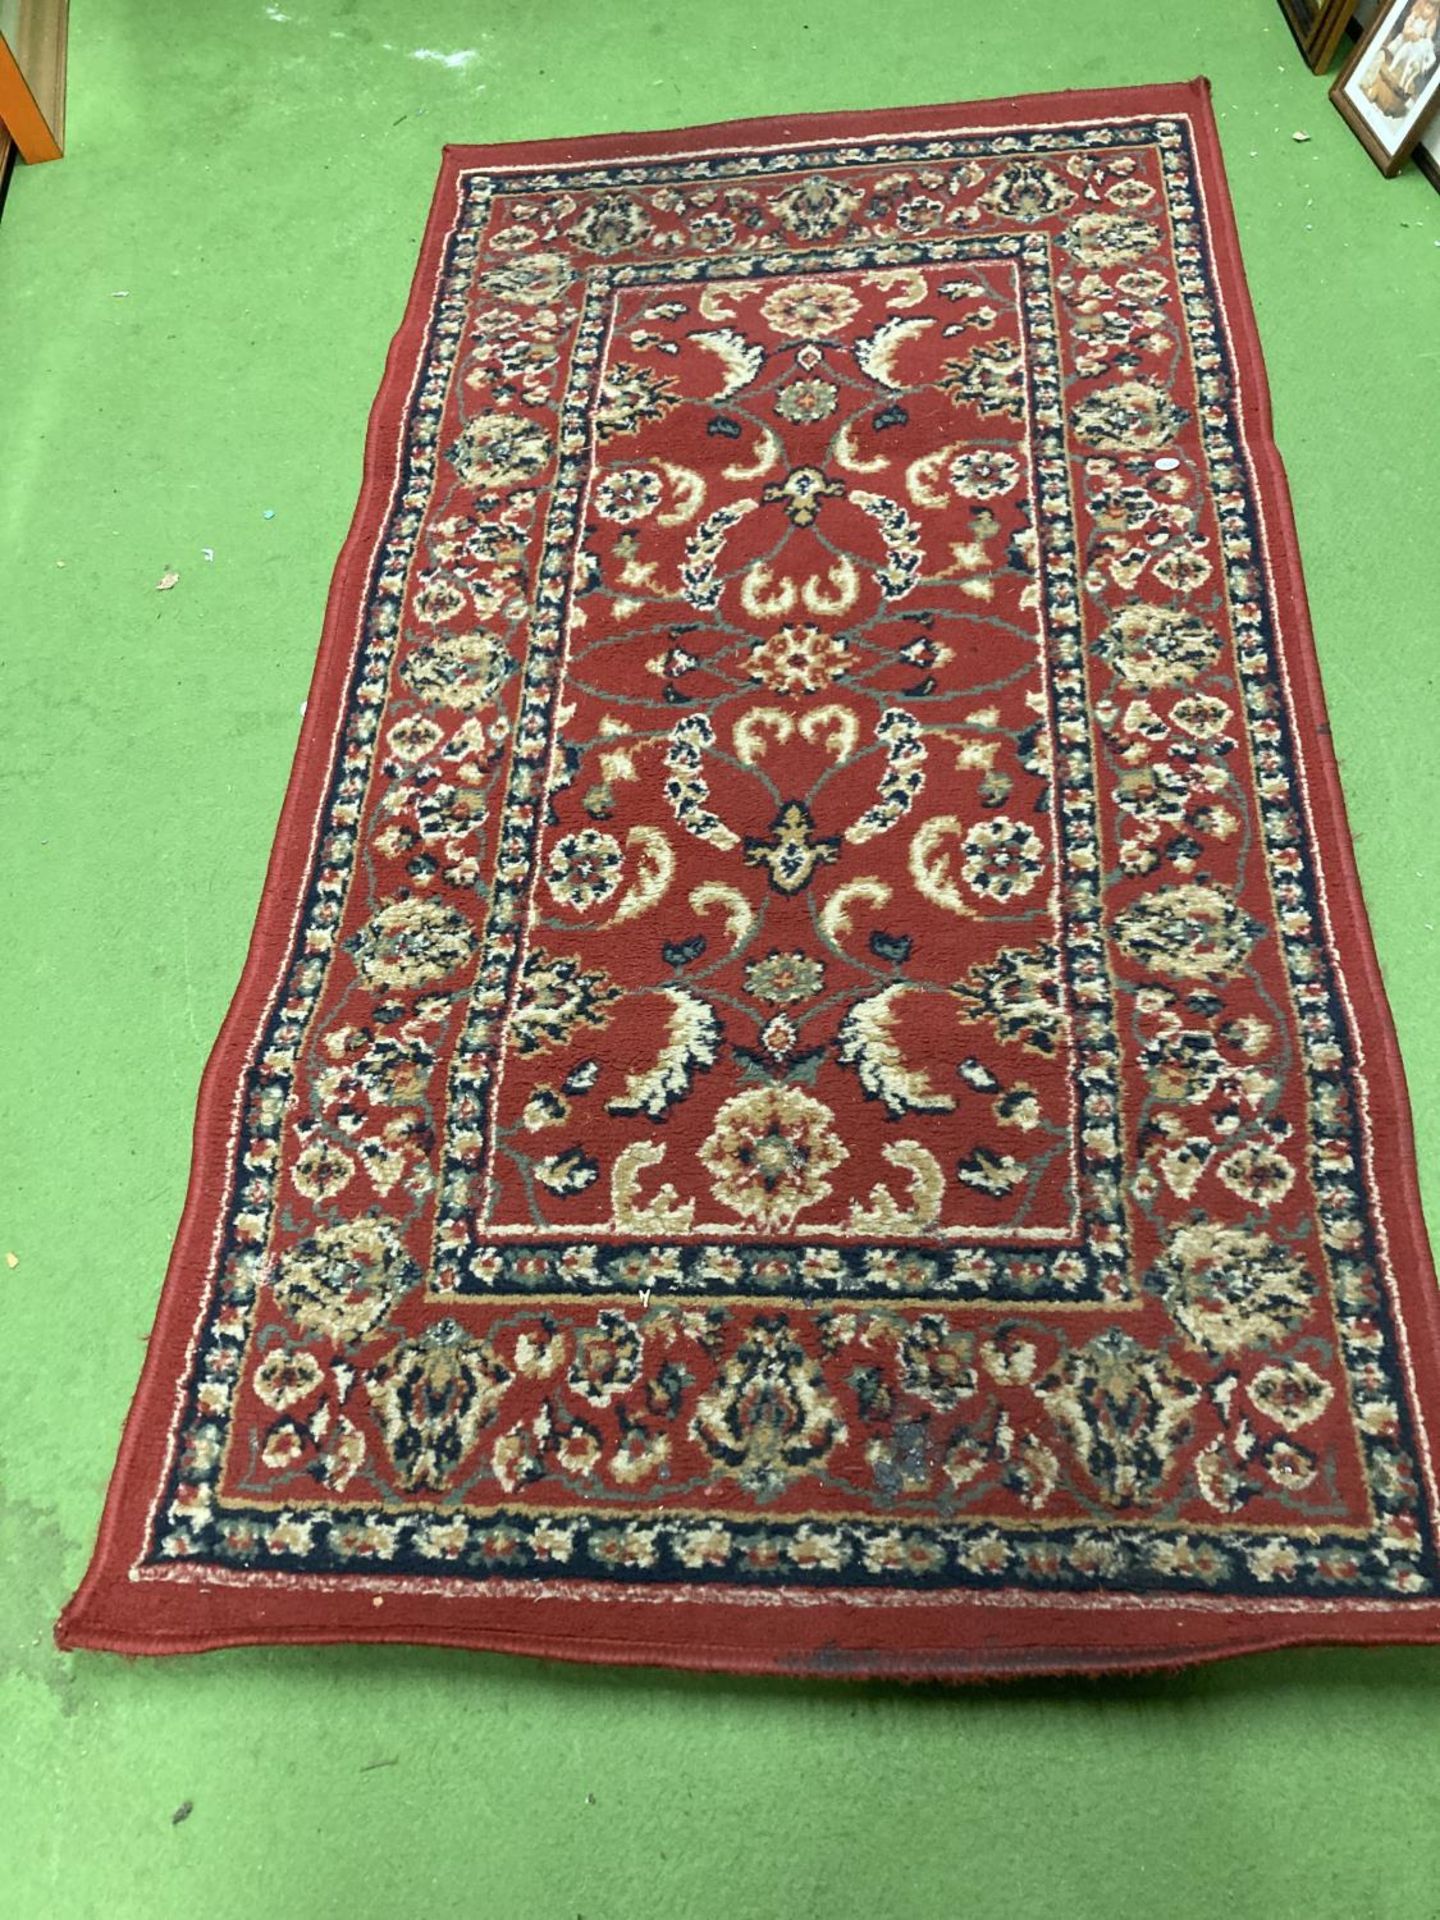 A RED WOOLLEN PATTERNED RUG 150CM X 79CM